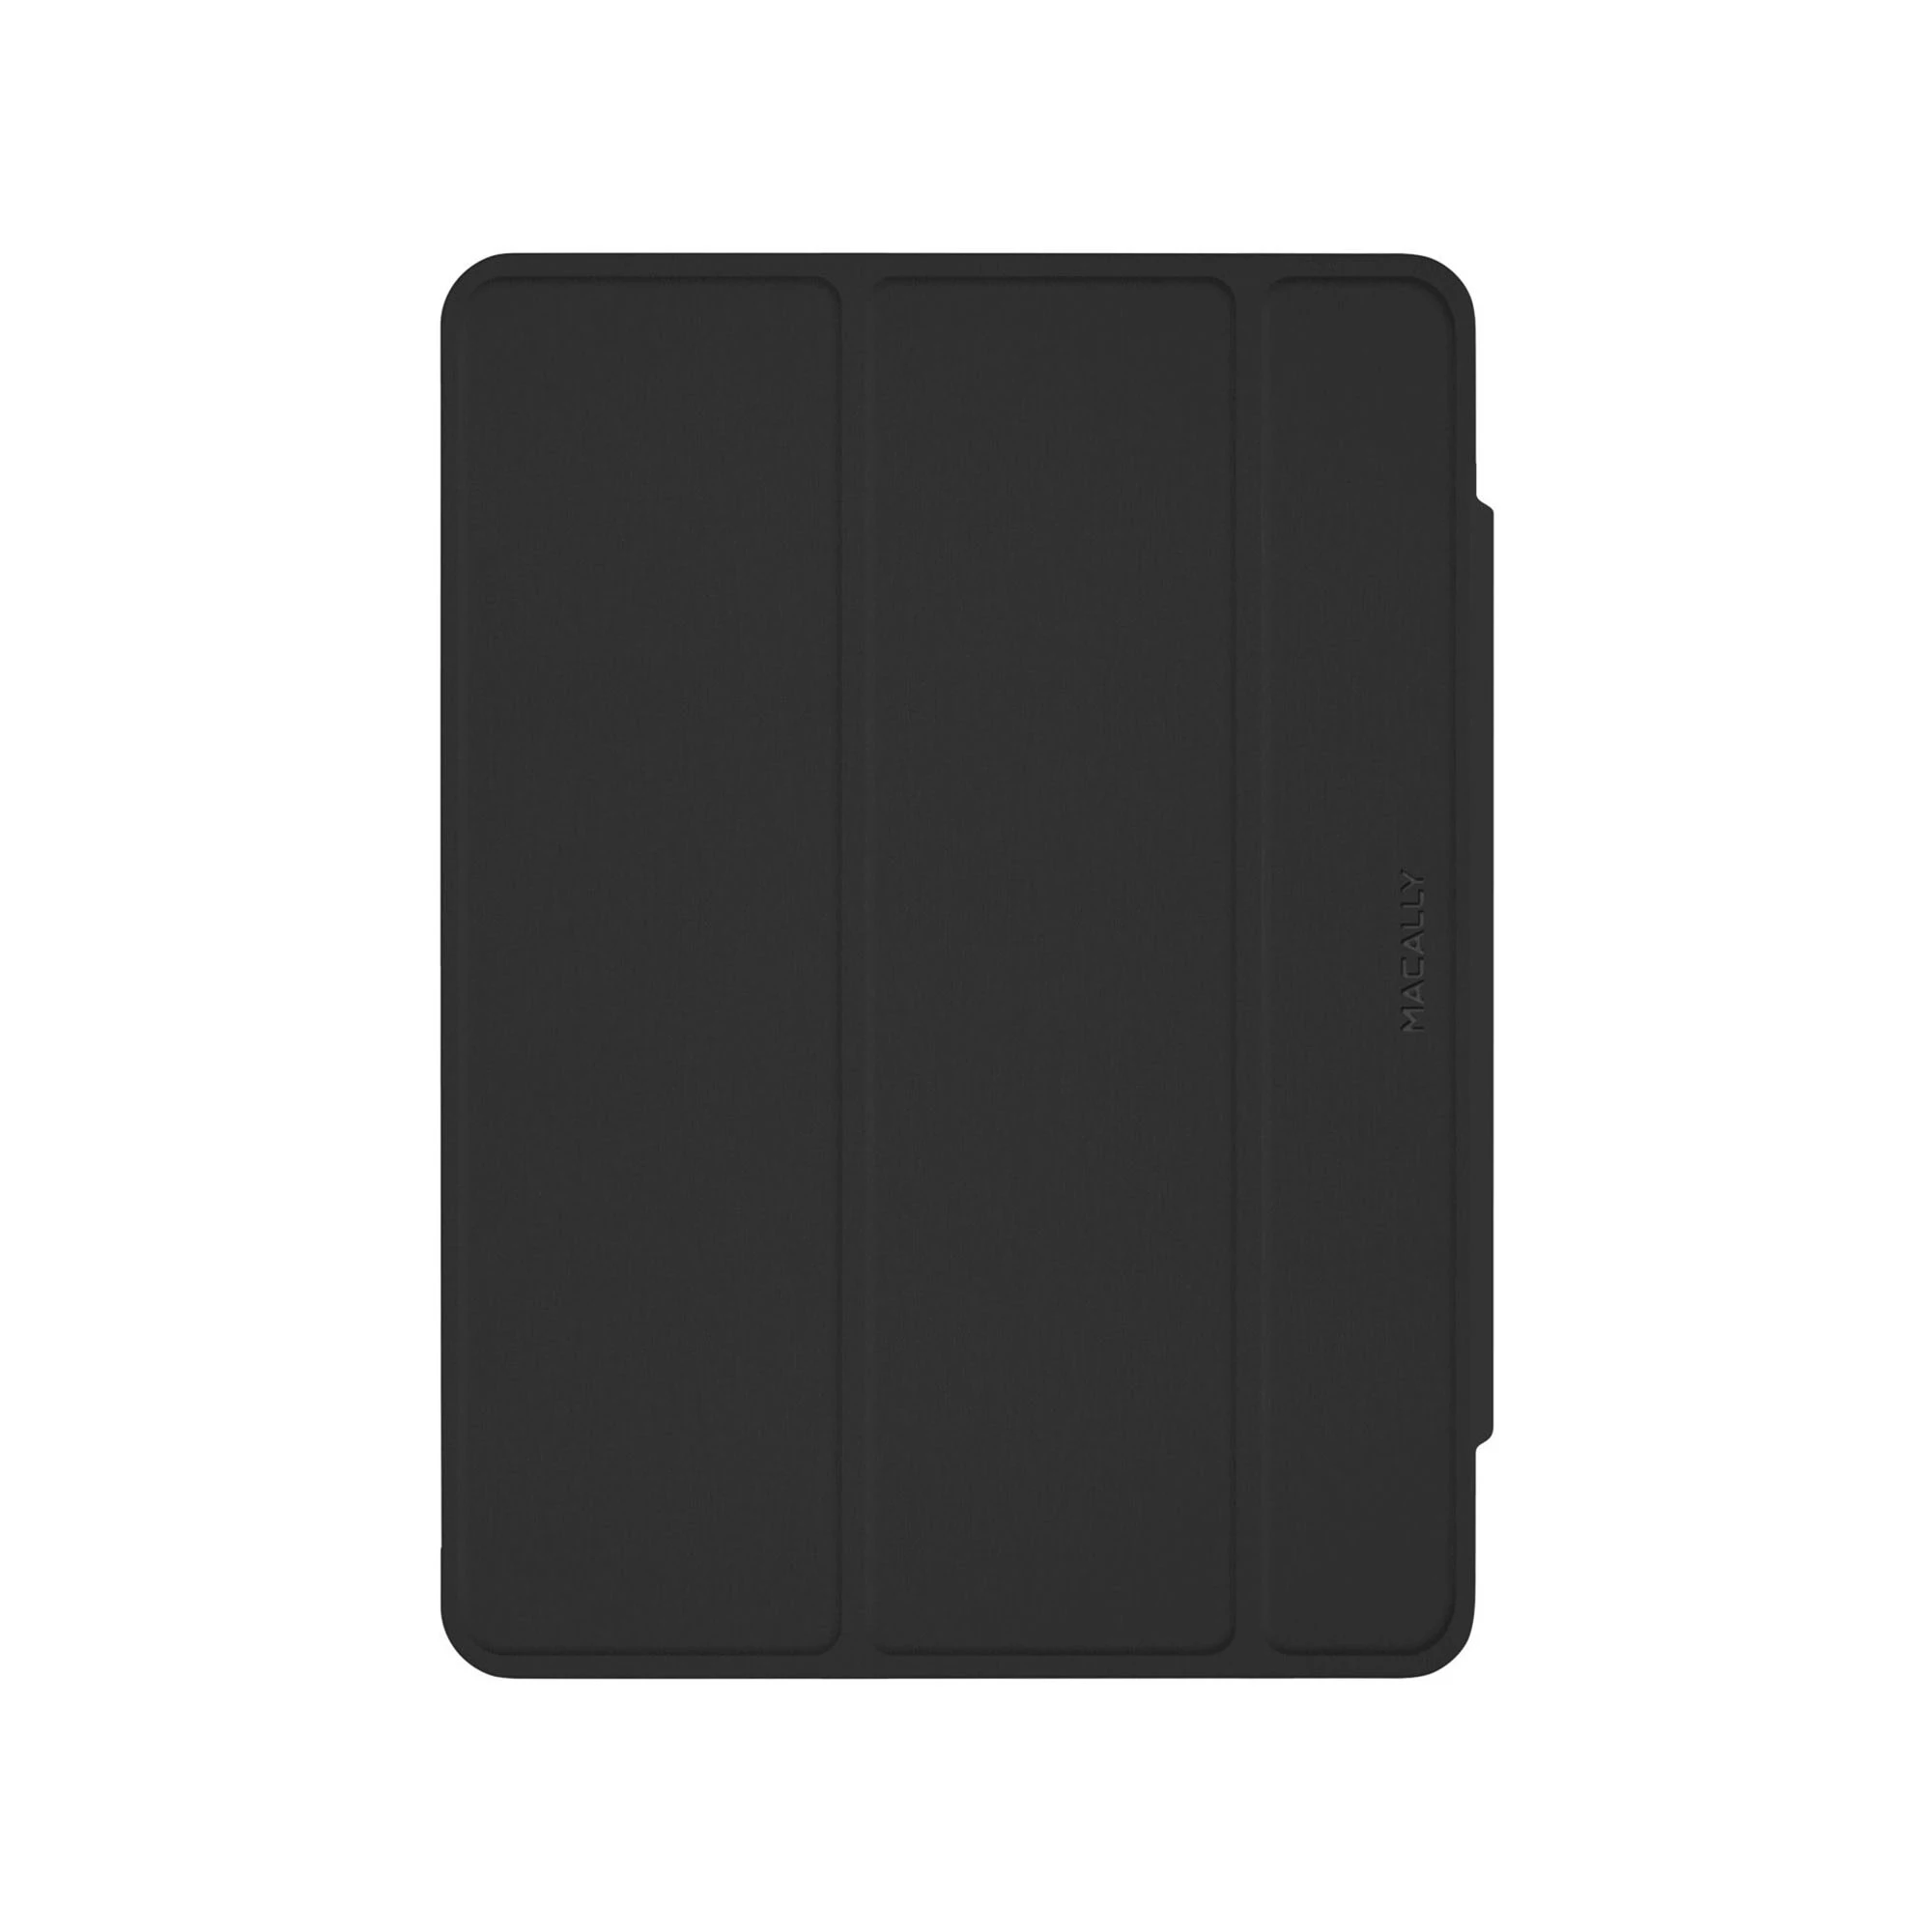 Macally Protective Case and Stand for iPad Air (4th generation) - Black (BSTANDA4-B)